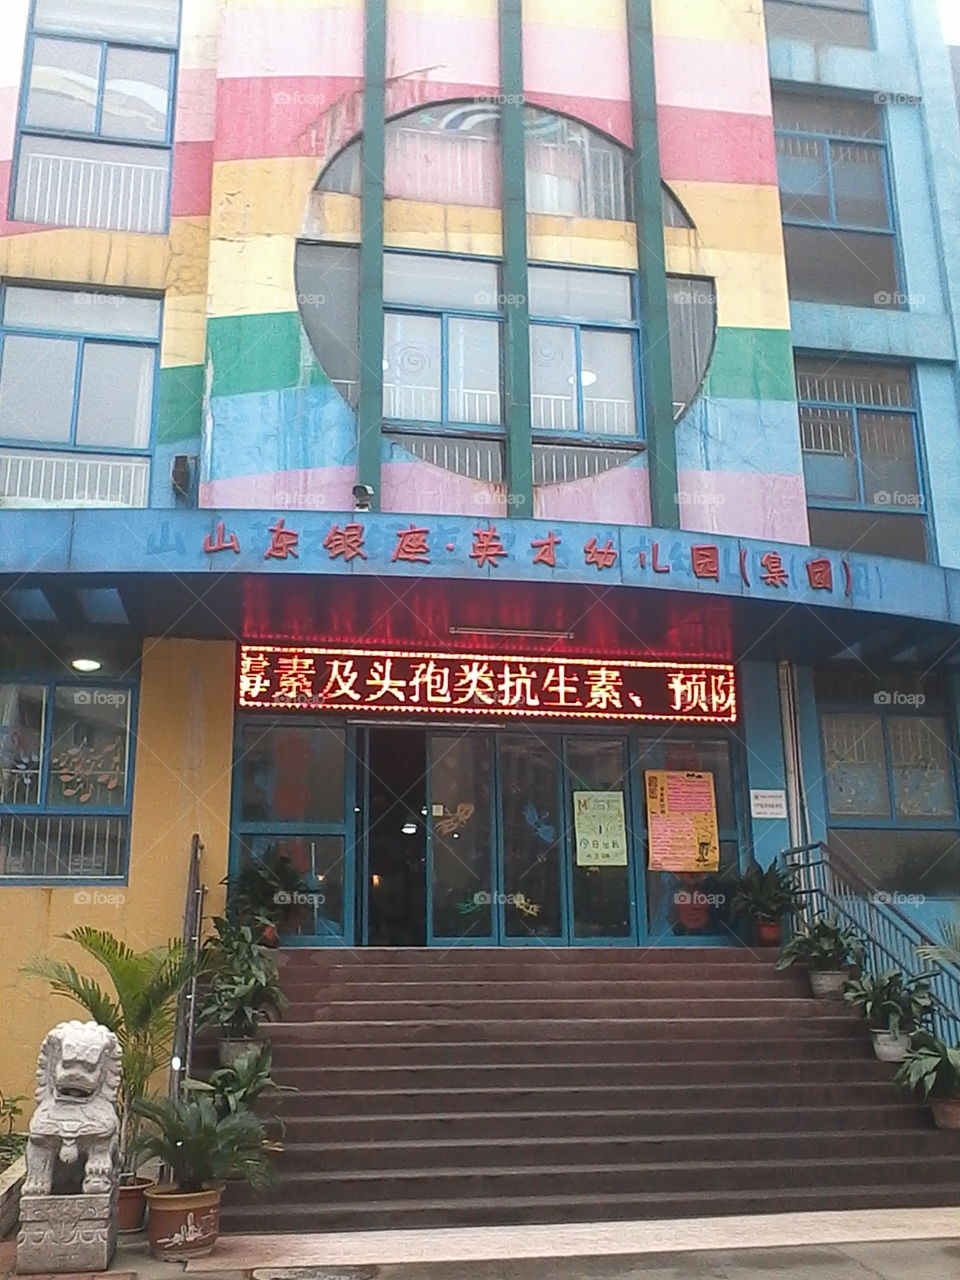 School in China. worked at this school